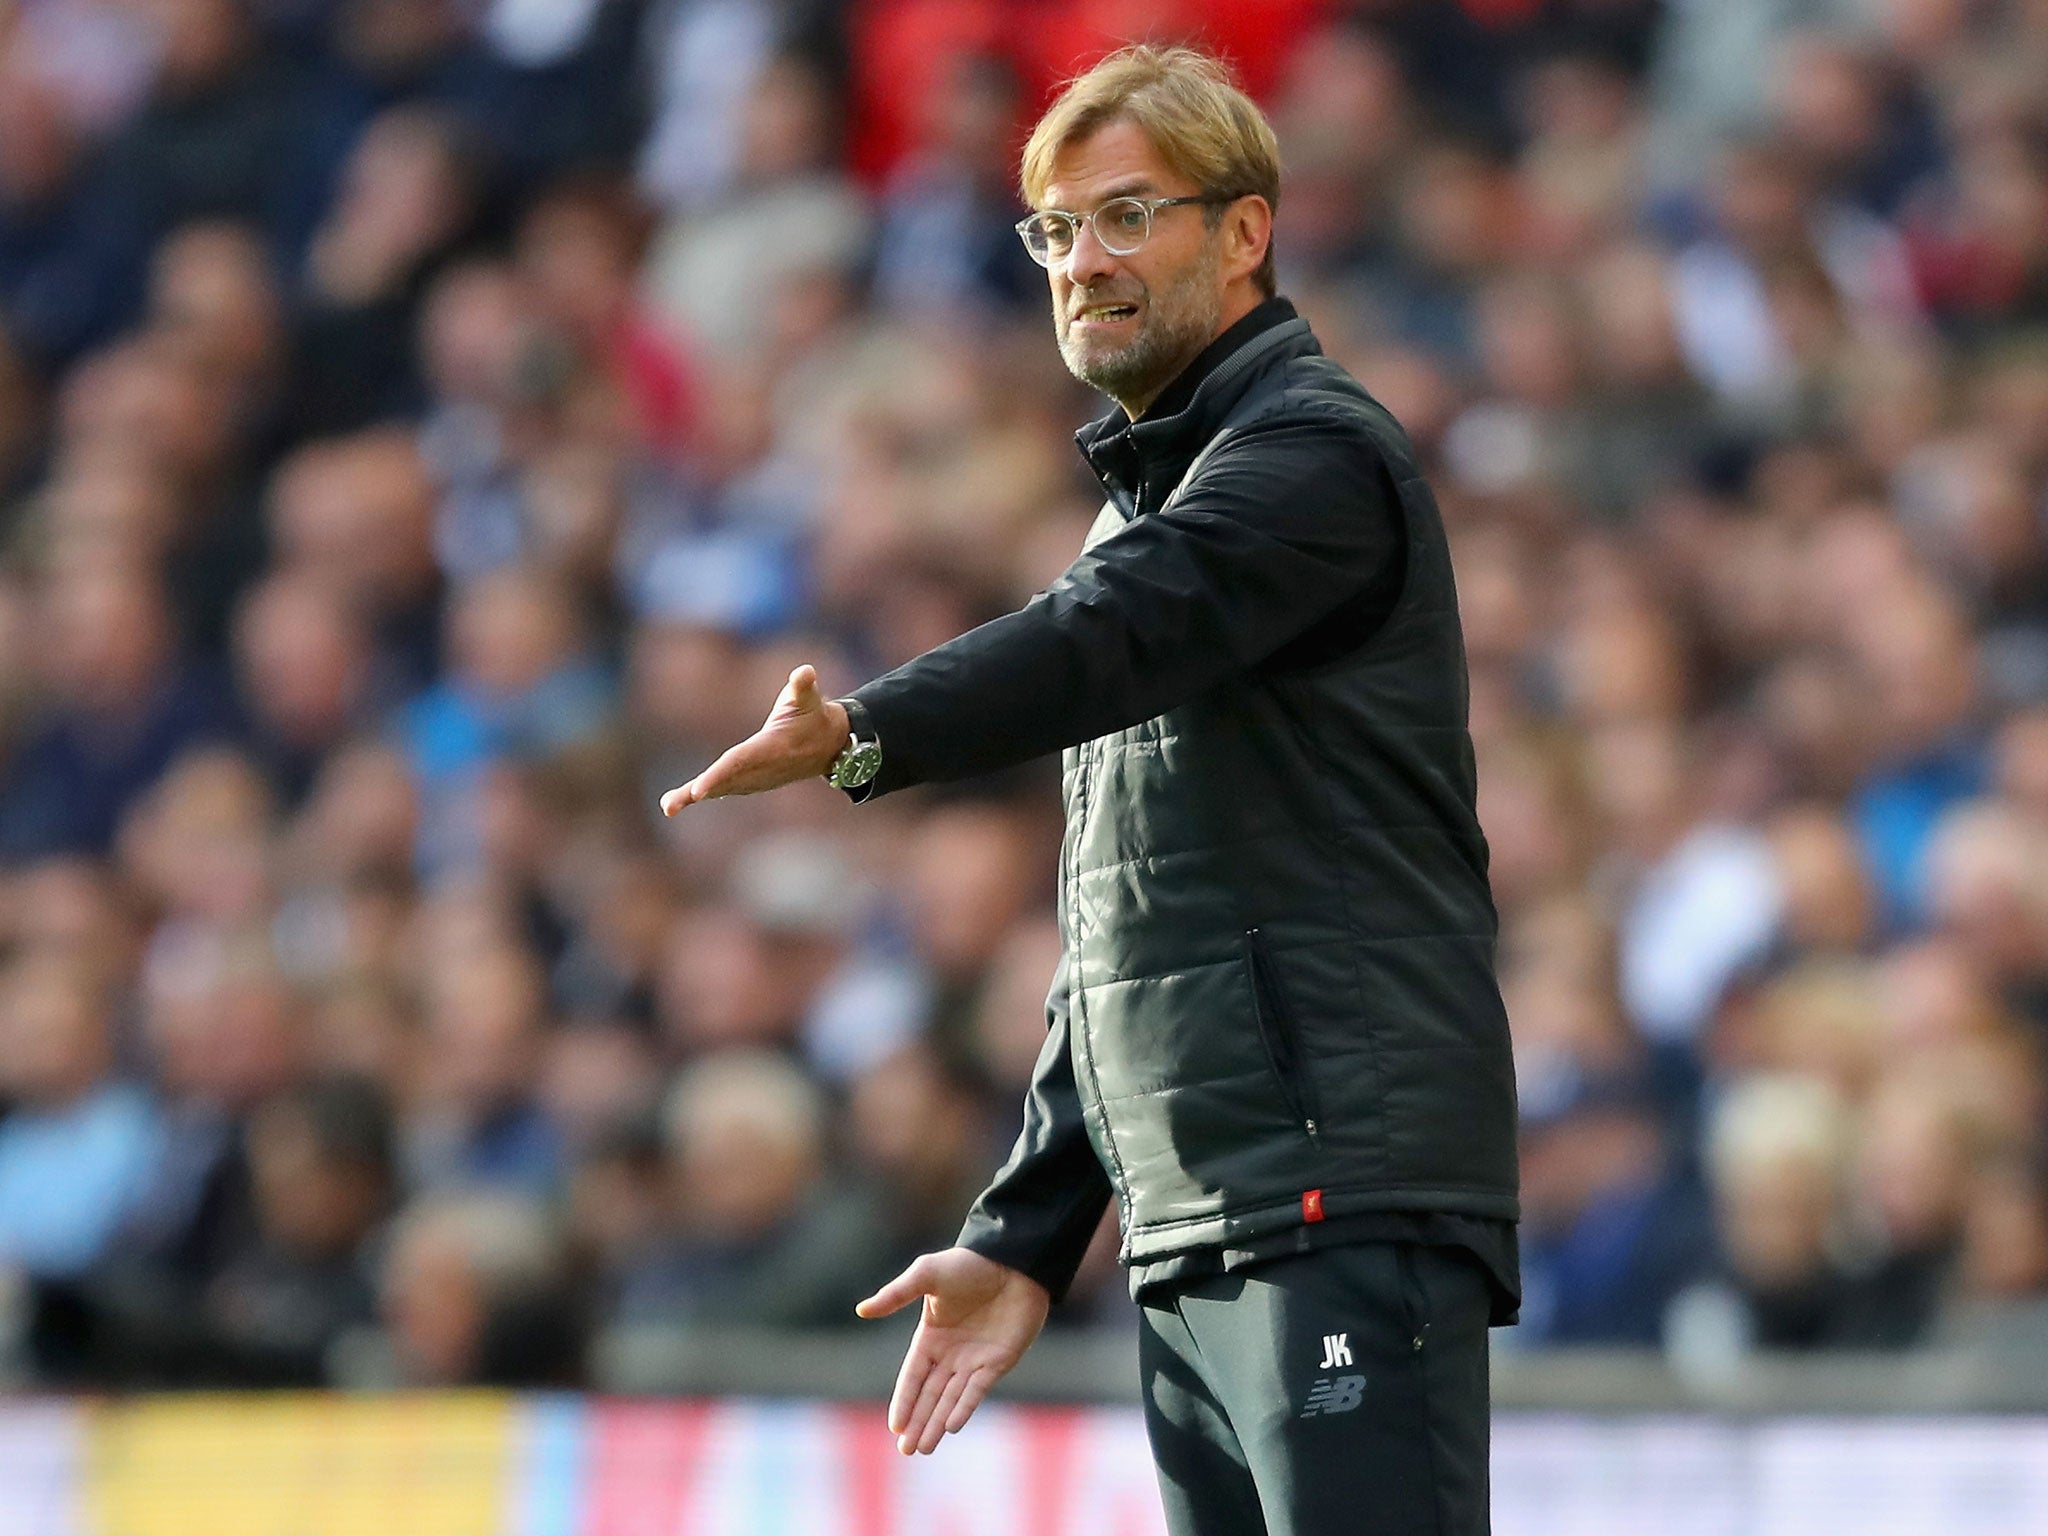 It was another frustrating afternoon for the Liverpool manager